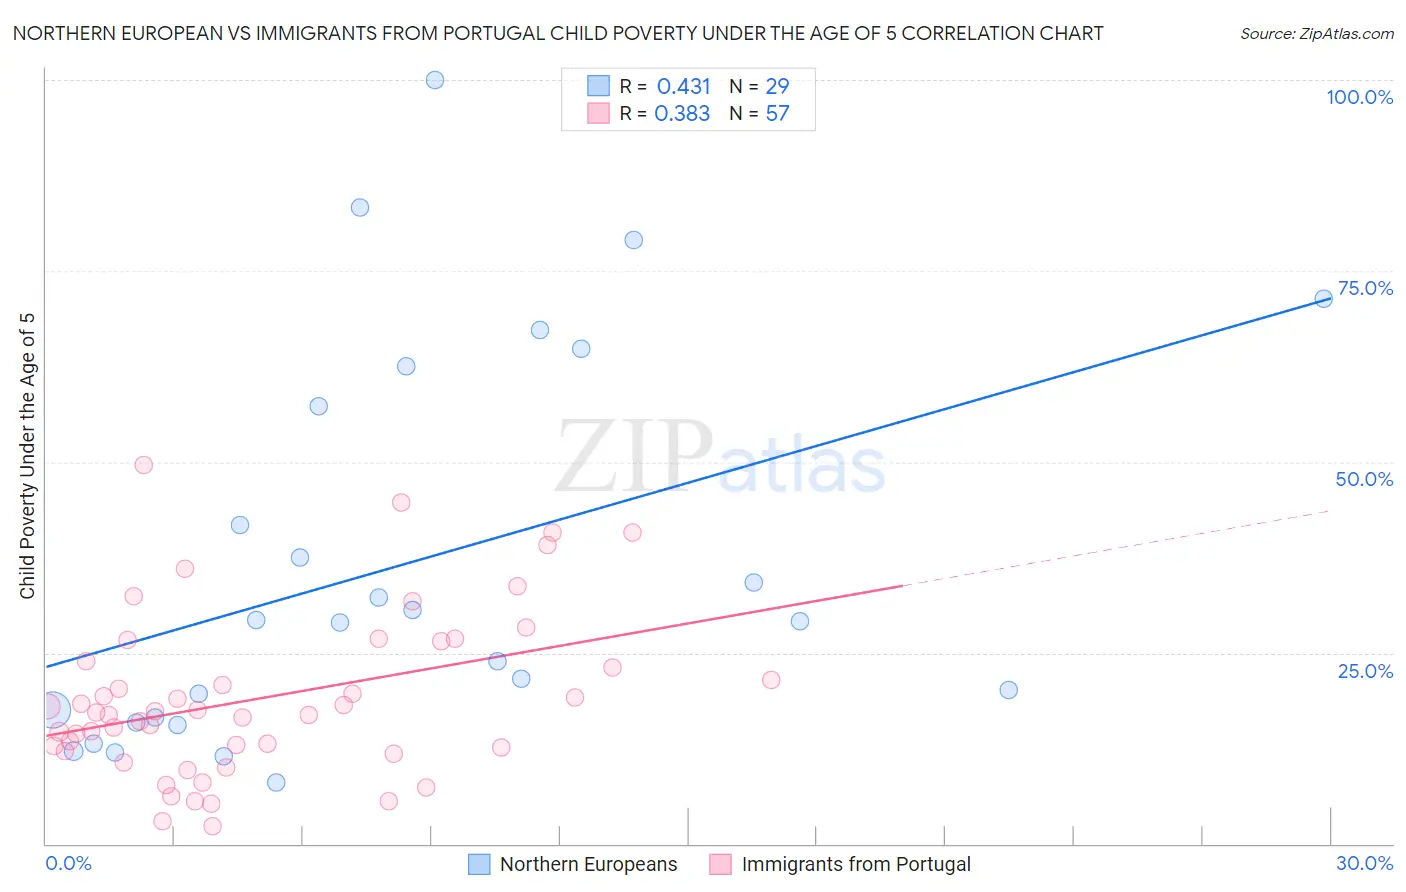 Northern European vs Immigrants from Portugal Child Poverty Under the Age of 5